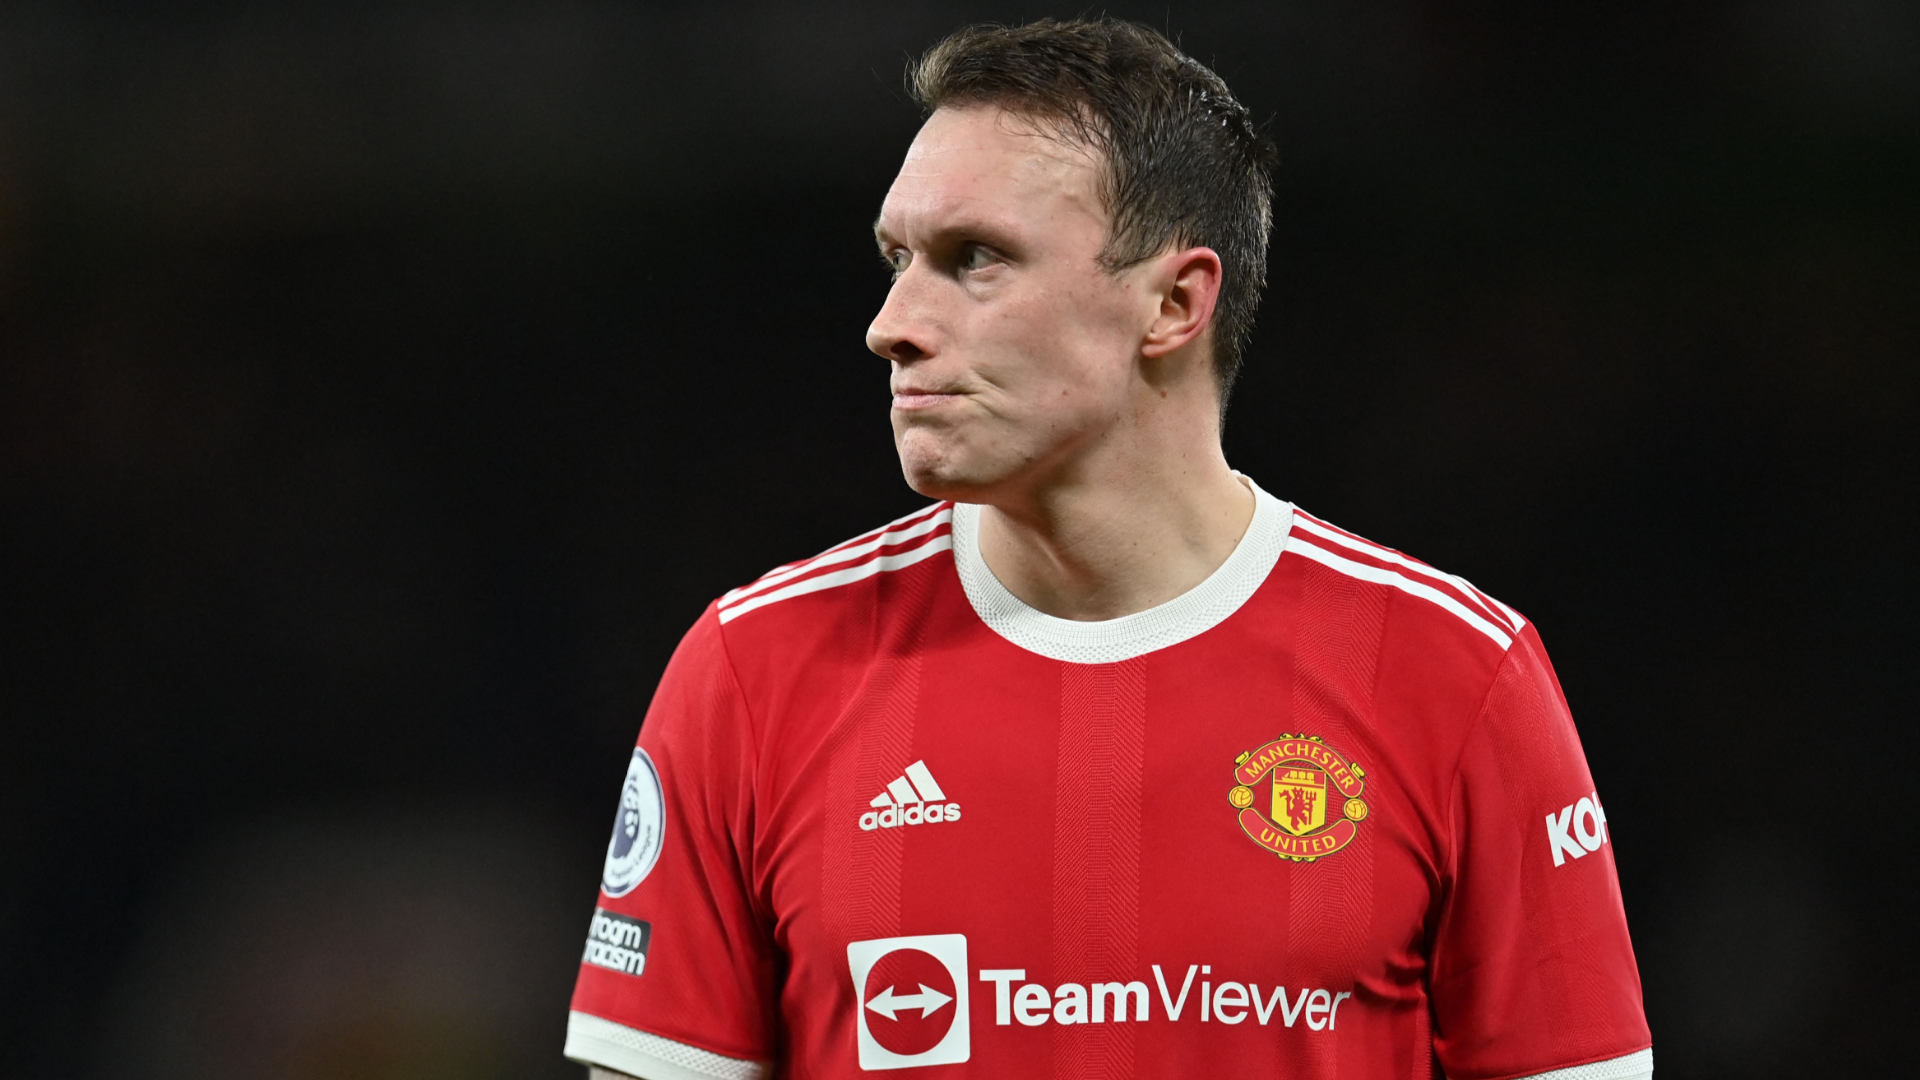 ‘It’s been very difficult’ – Injury-ravaged Phil Jones reacts to Man Utd release after 12 years at Old Trafford